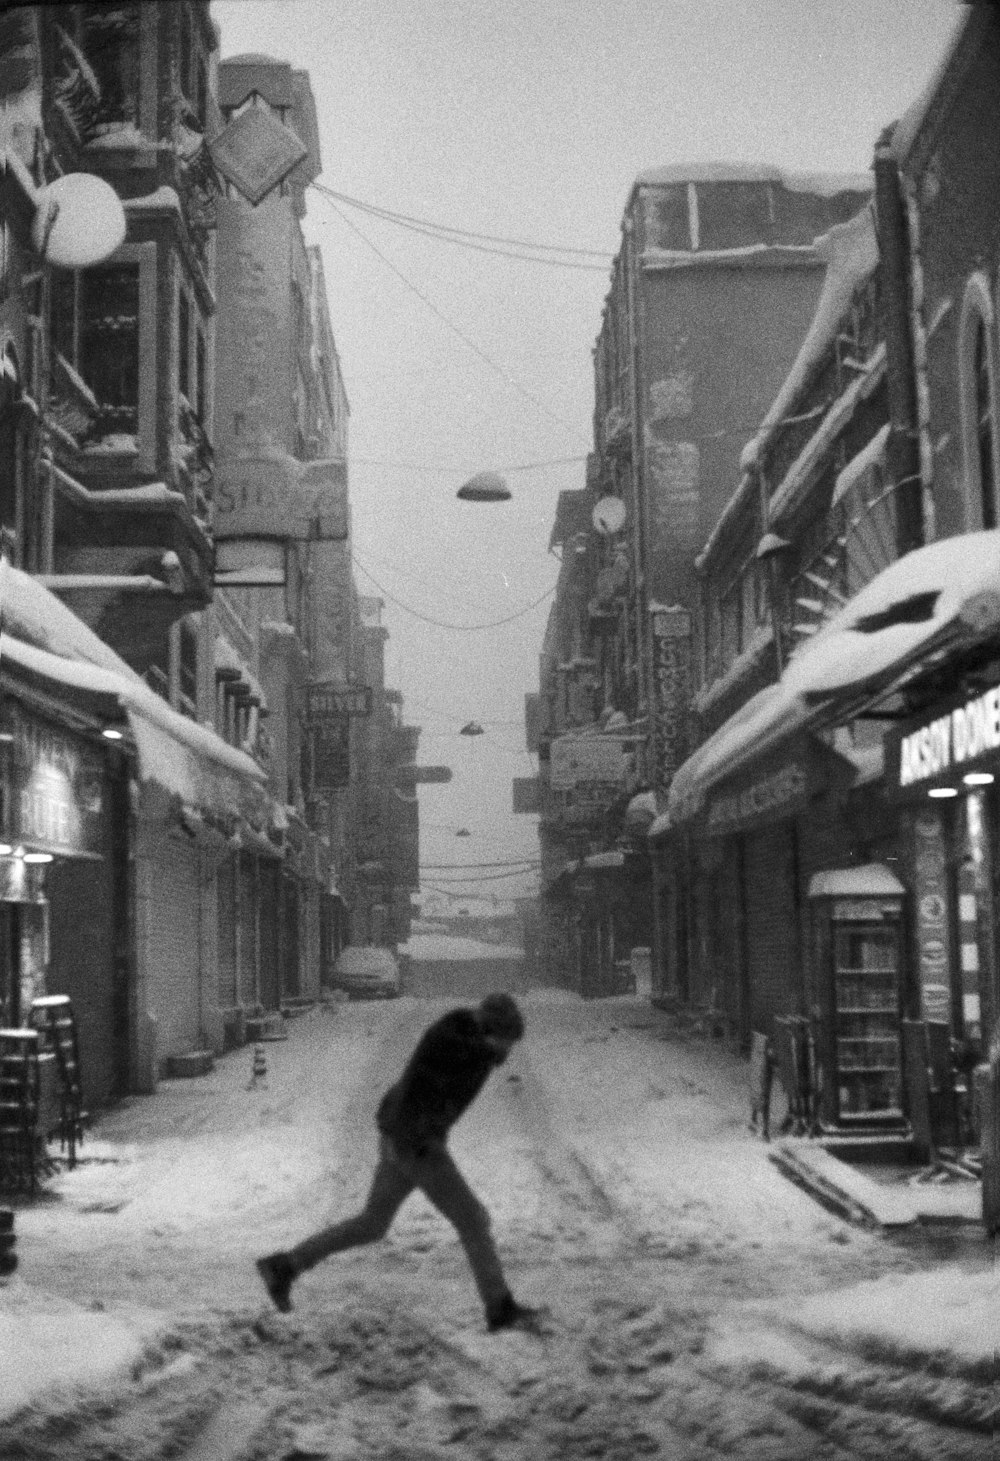 a man walking down a snow covered street